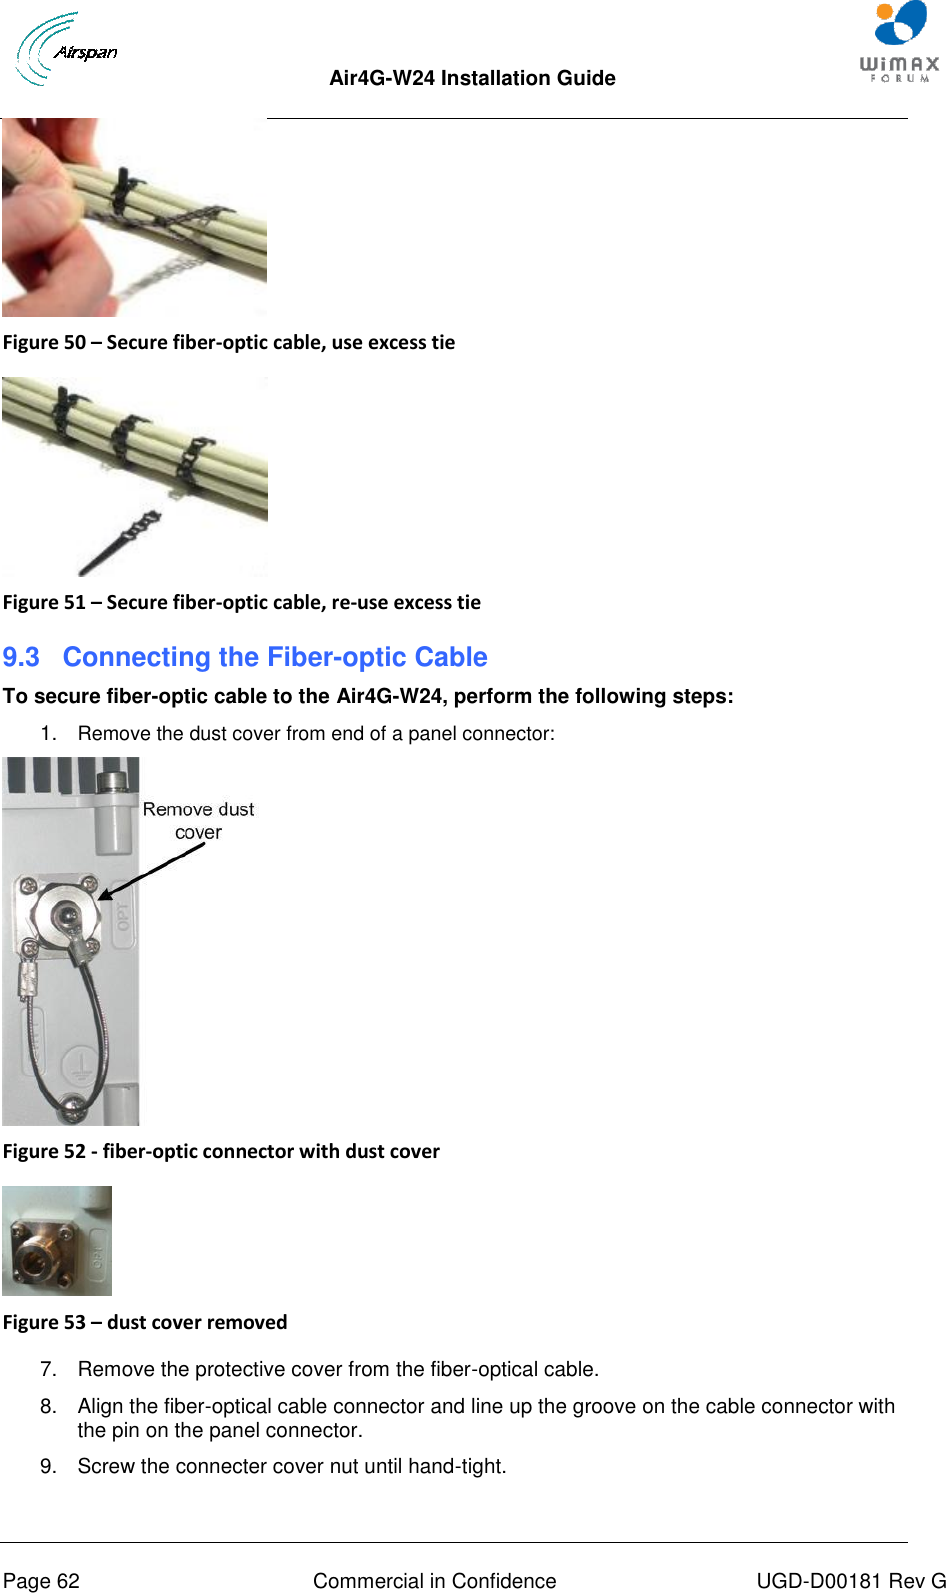  Air4G-W24 Installation Guide       Page 62  Commercial in Confidence  UGD-D00181 Rev G  Figure 50 – Secure fiber-optic cable, use excess tie   Figure 51 – Secure fiber-optic cable, re-use excess tie 9.3  Connecting the Fiber-optic Cable To secure fiber-optic cable to the Air4G-W24, perform the following steps: 1.  Remove the dust cover from end of a panel connector:  Figure 52 - fiber-optic connector with dust cover   Figure 53 – dust cover removed  7.  Remove the protective cover from the fiber-optical cable. 8.  Align the fiber-optical cable connector and line up the groove on the cable connector with the pin on the panel connector. 9.  Screw the connecter cover nut until hand-tight. 